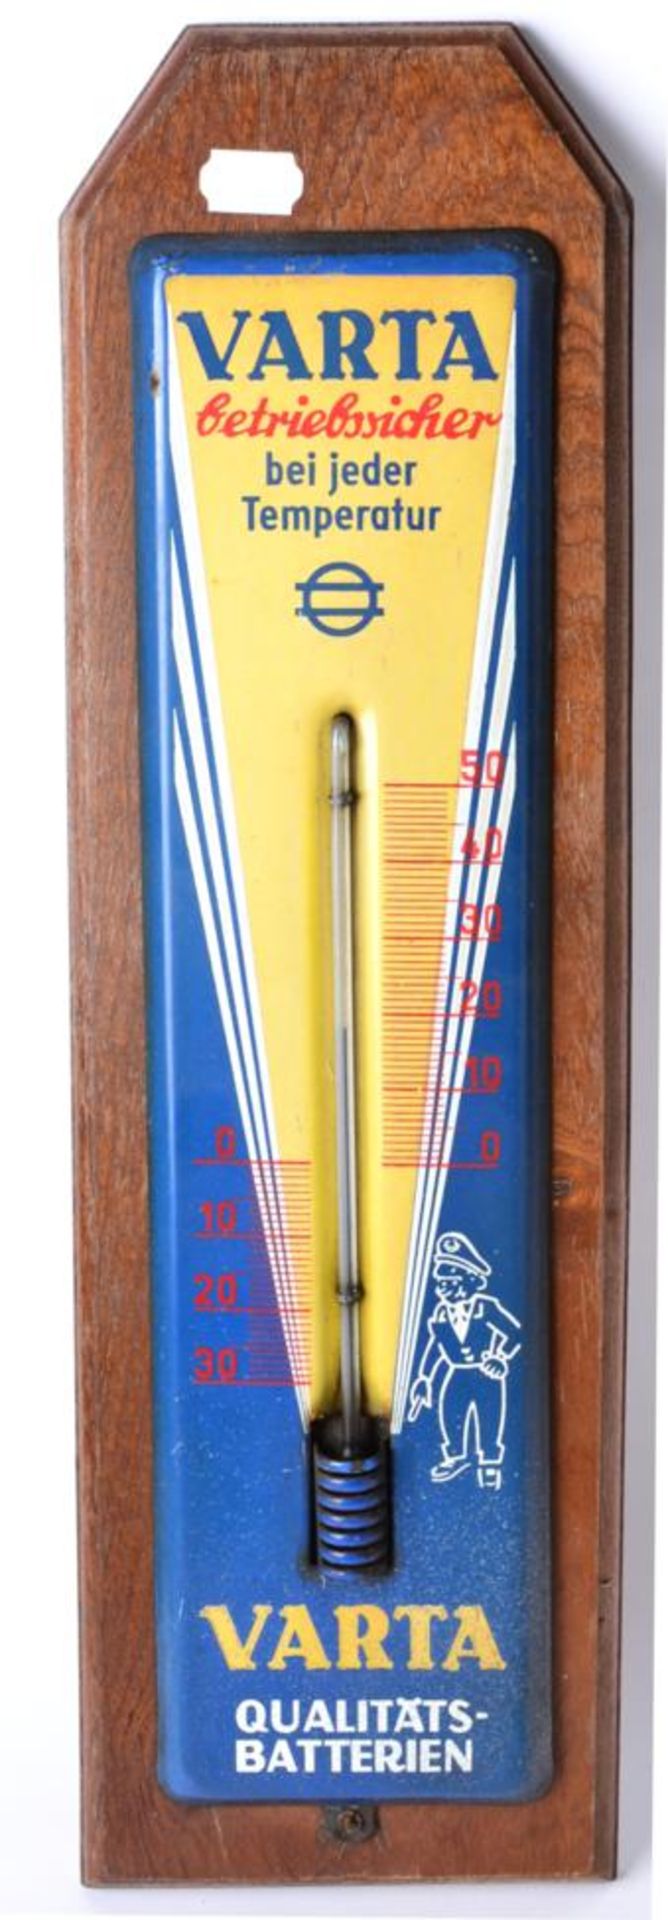 A Vintage German VARTA Advertising Sign/Thermometer, mounted on a brown oak plaque, 61cm by 18cm